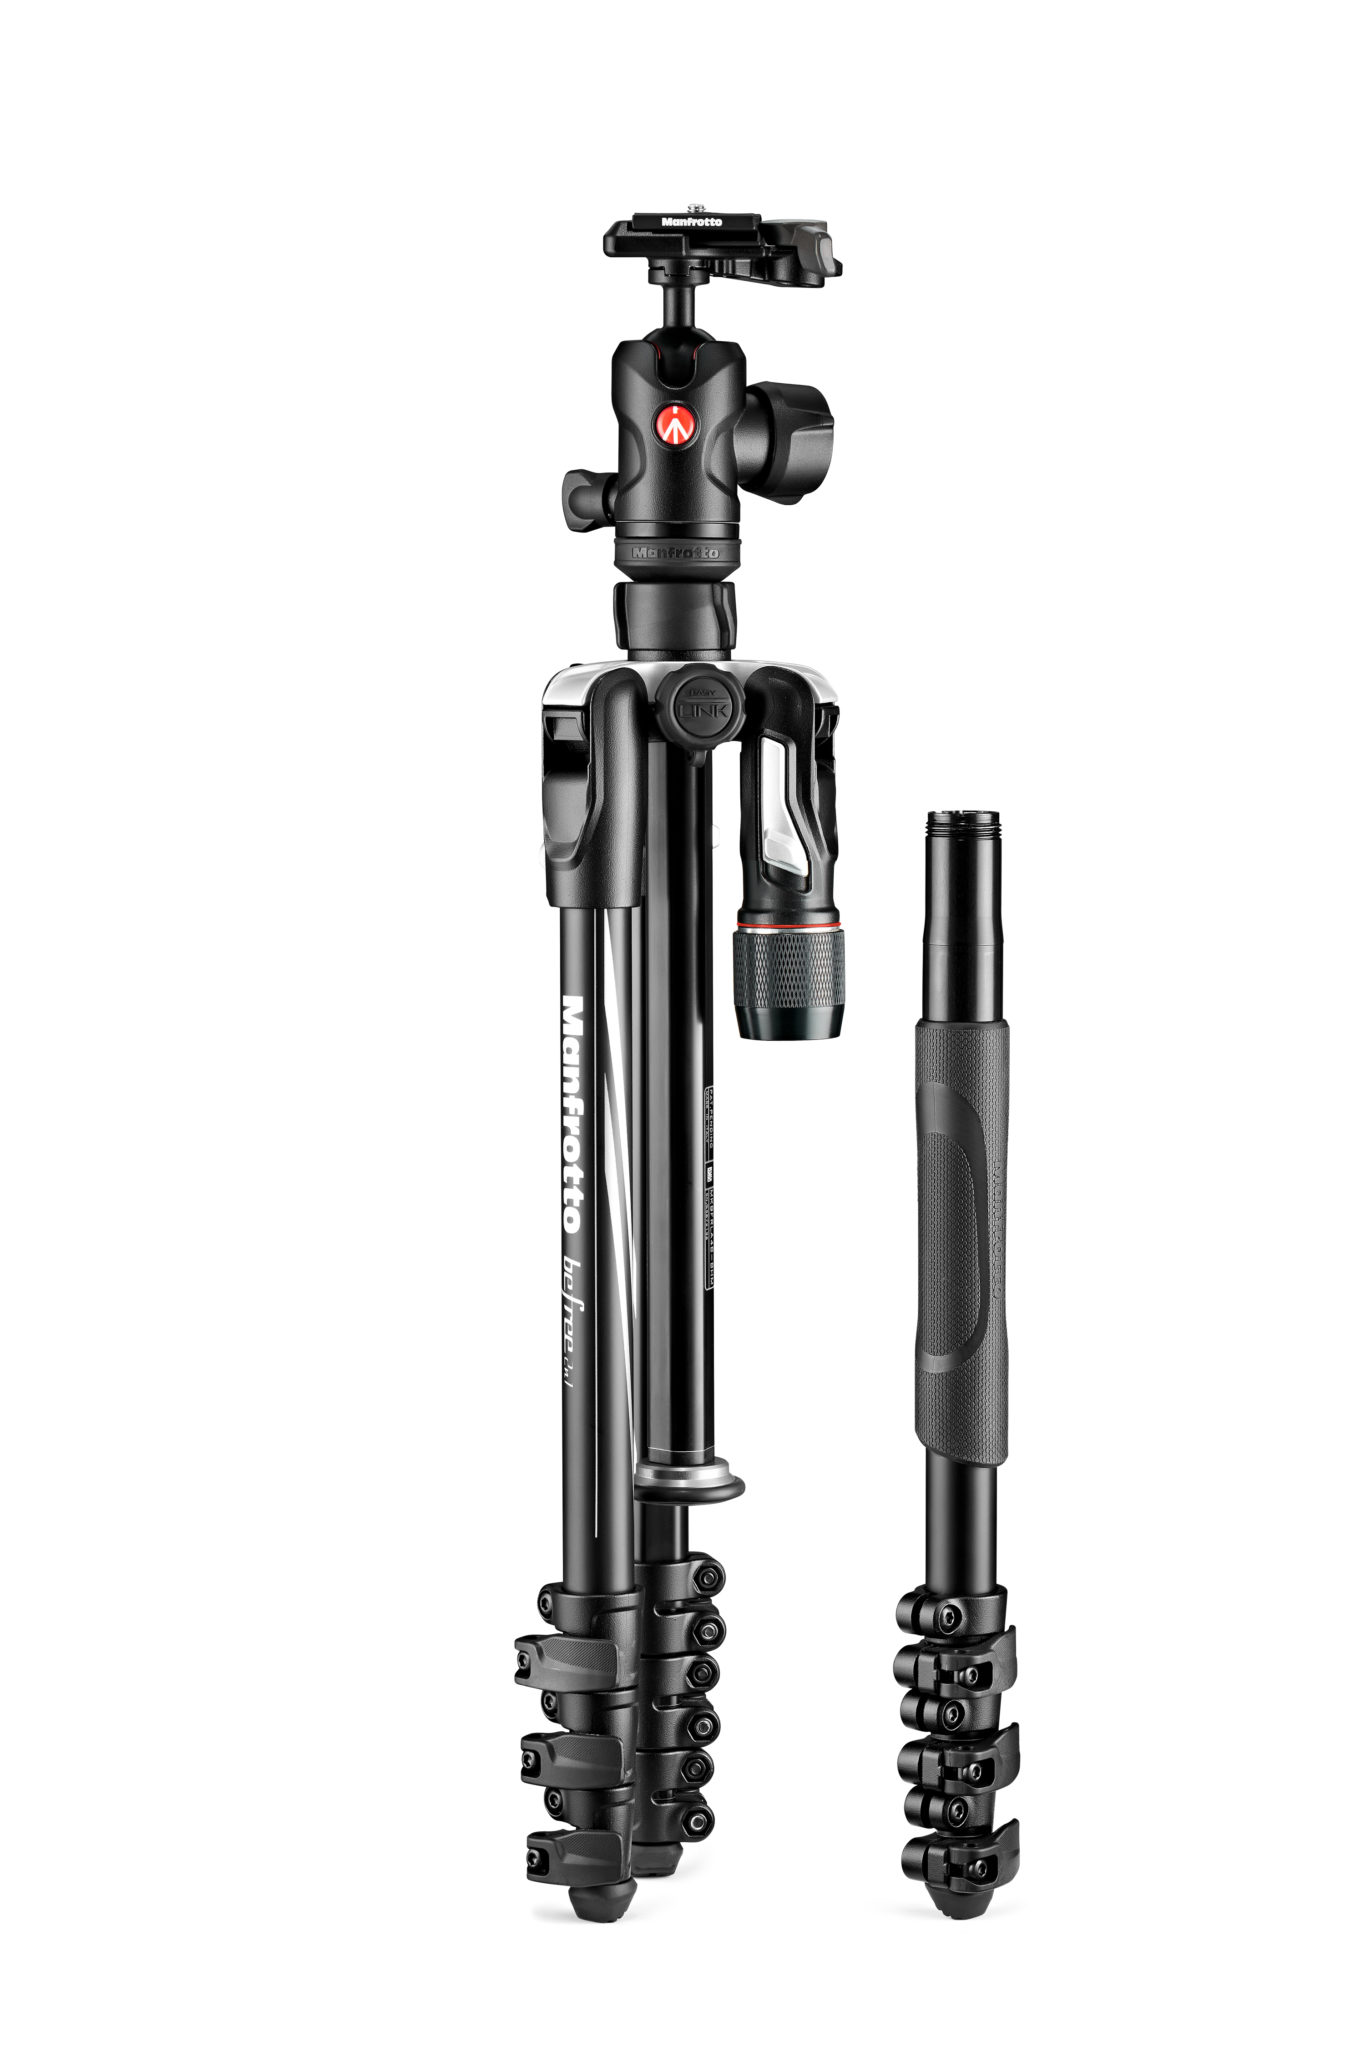 Manfrotto Adds New 2N1 Tripod to Monopod to Befree Collection